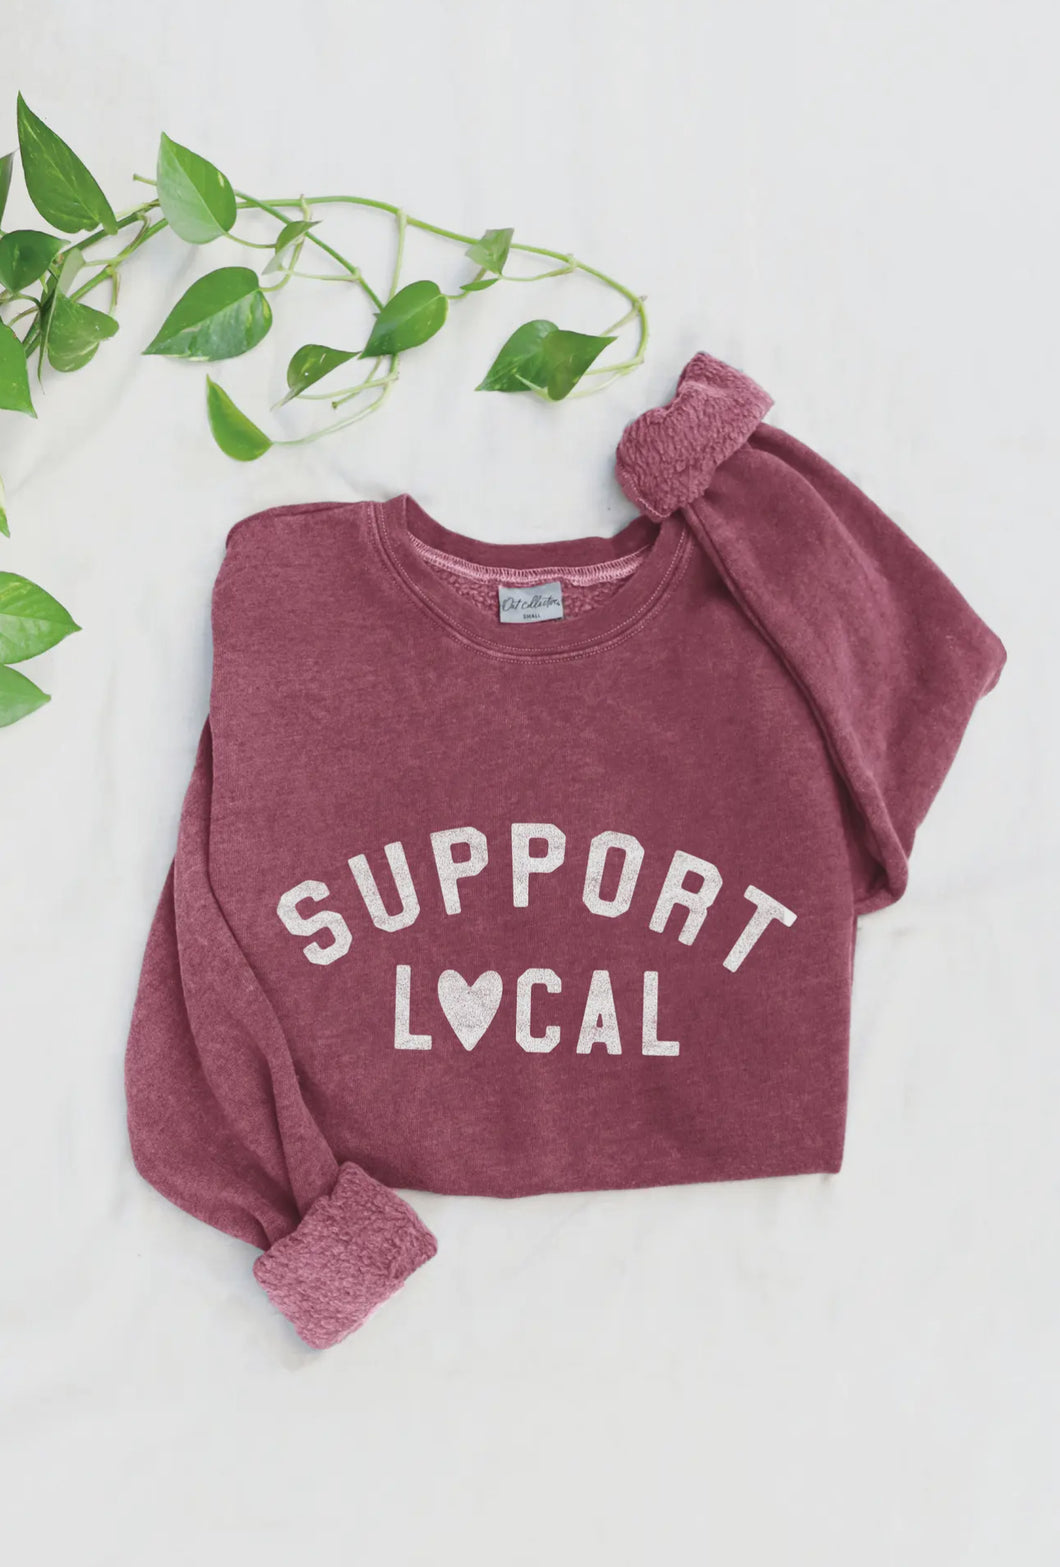 Support Local—the super soft collection